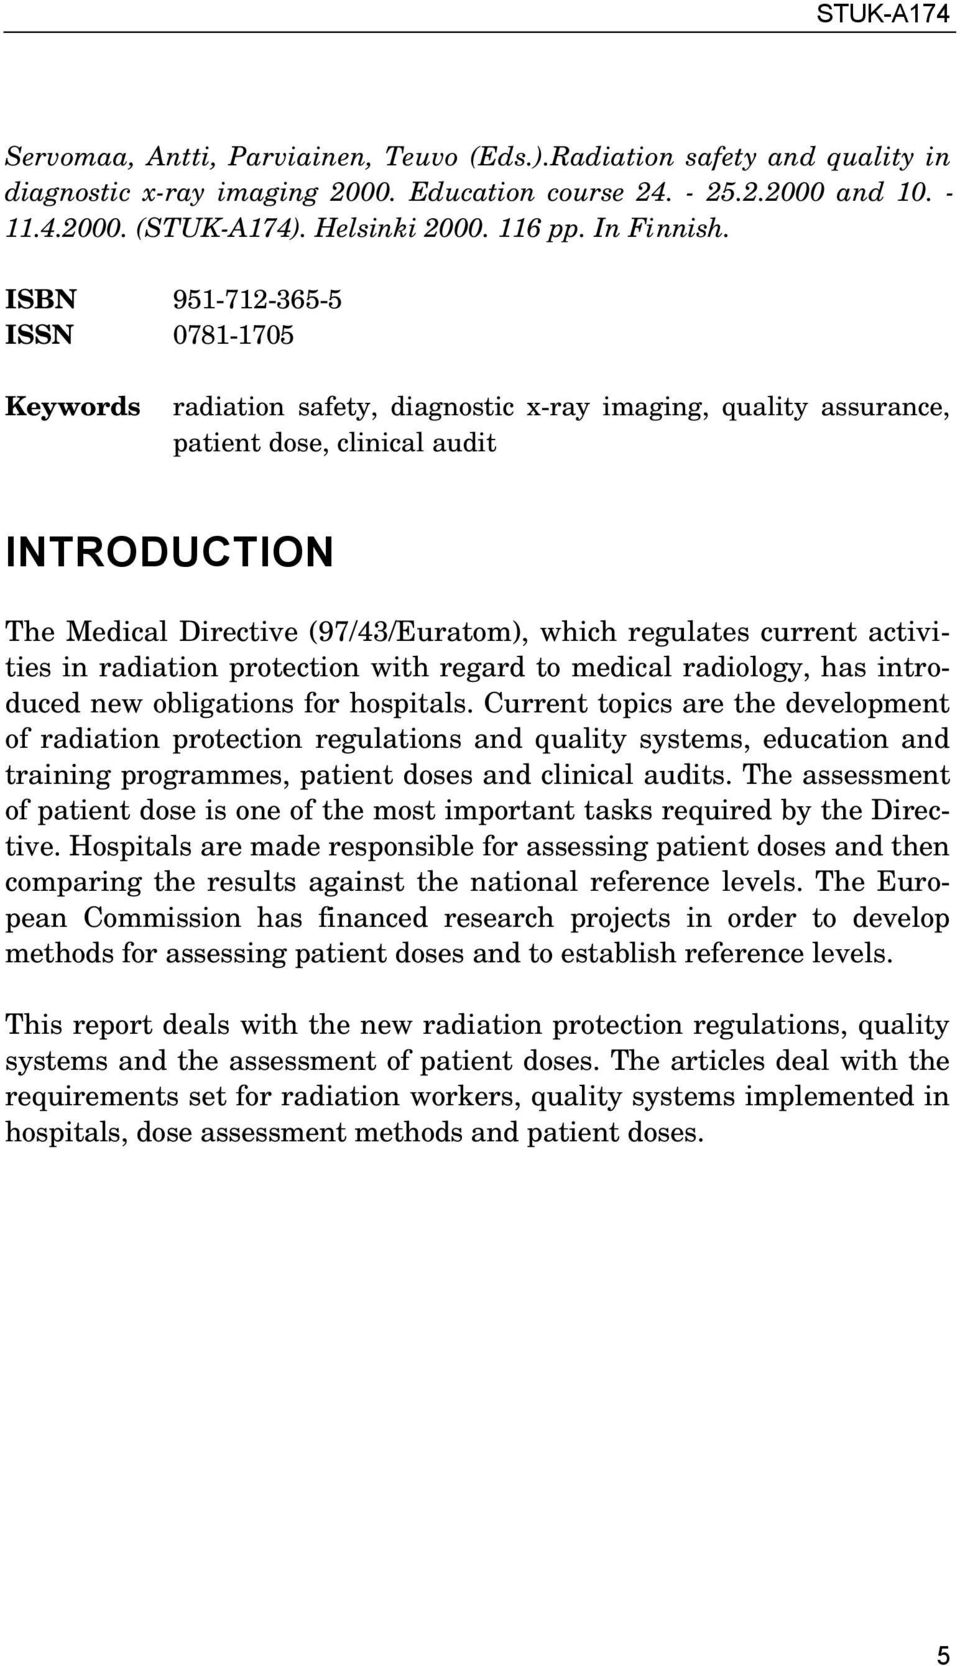 ISBN 951-712-365-5 ISSN 0781-1705 Keywords radiation safety, diagnostic x-ray imaging, quality assurance, patient dose, clinical audit INTRODUCTION The Medical Directive (97/43/Euratom), which